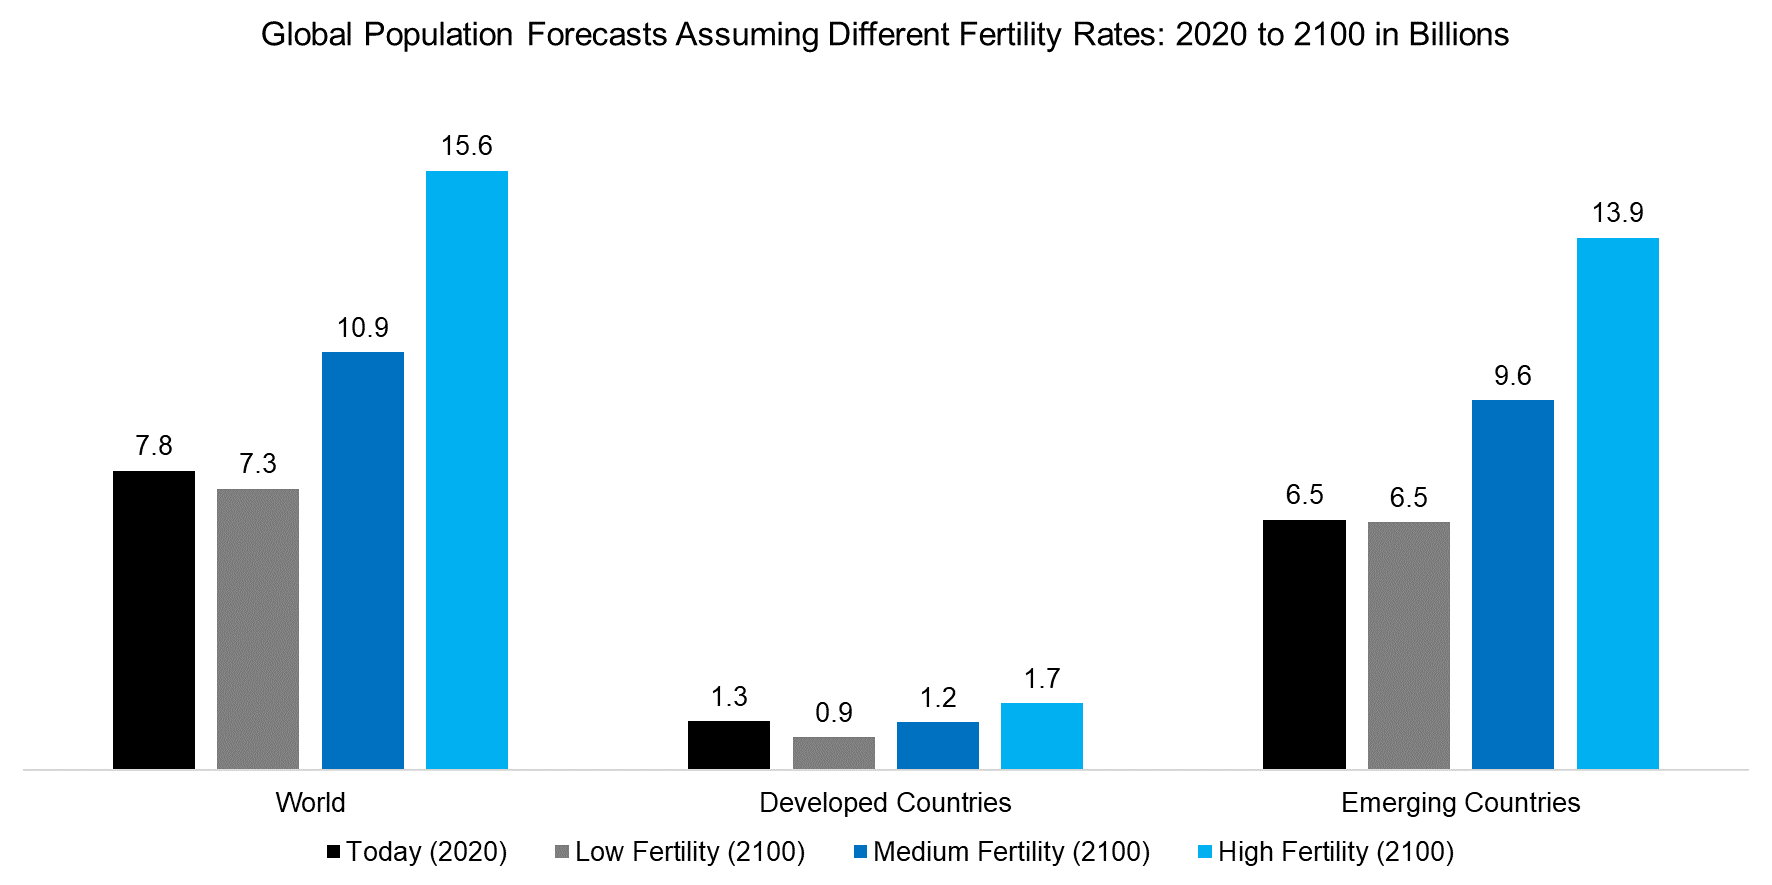 Global Population Forecasts Assuming Different Fertility Rates 2020 to 2100 in Billions